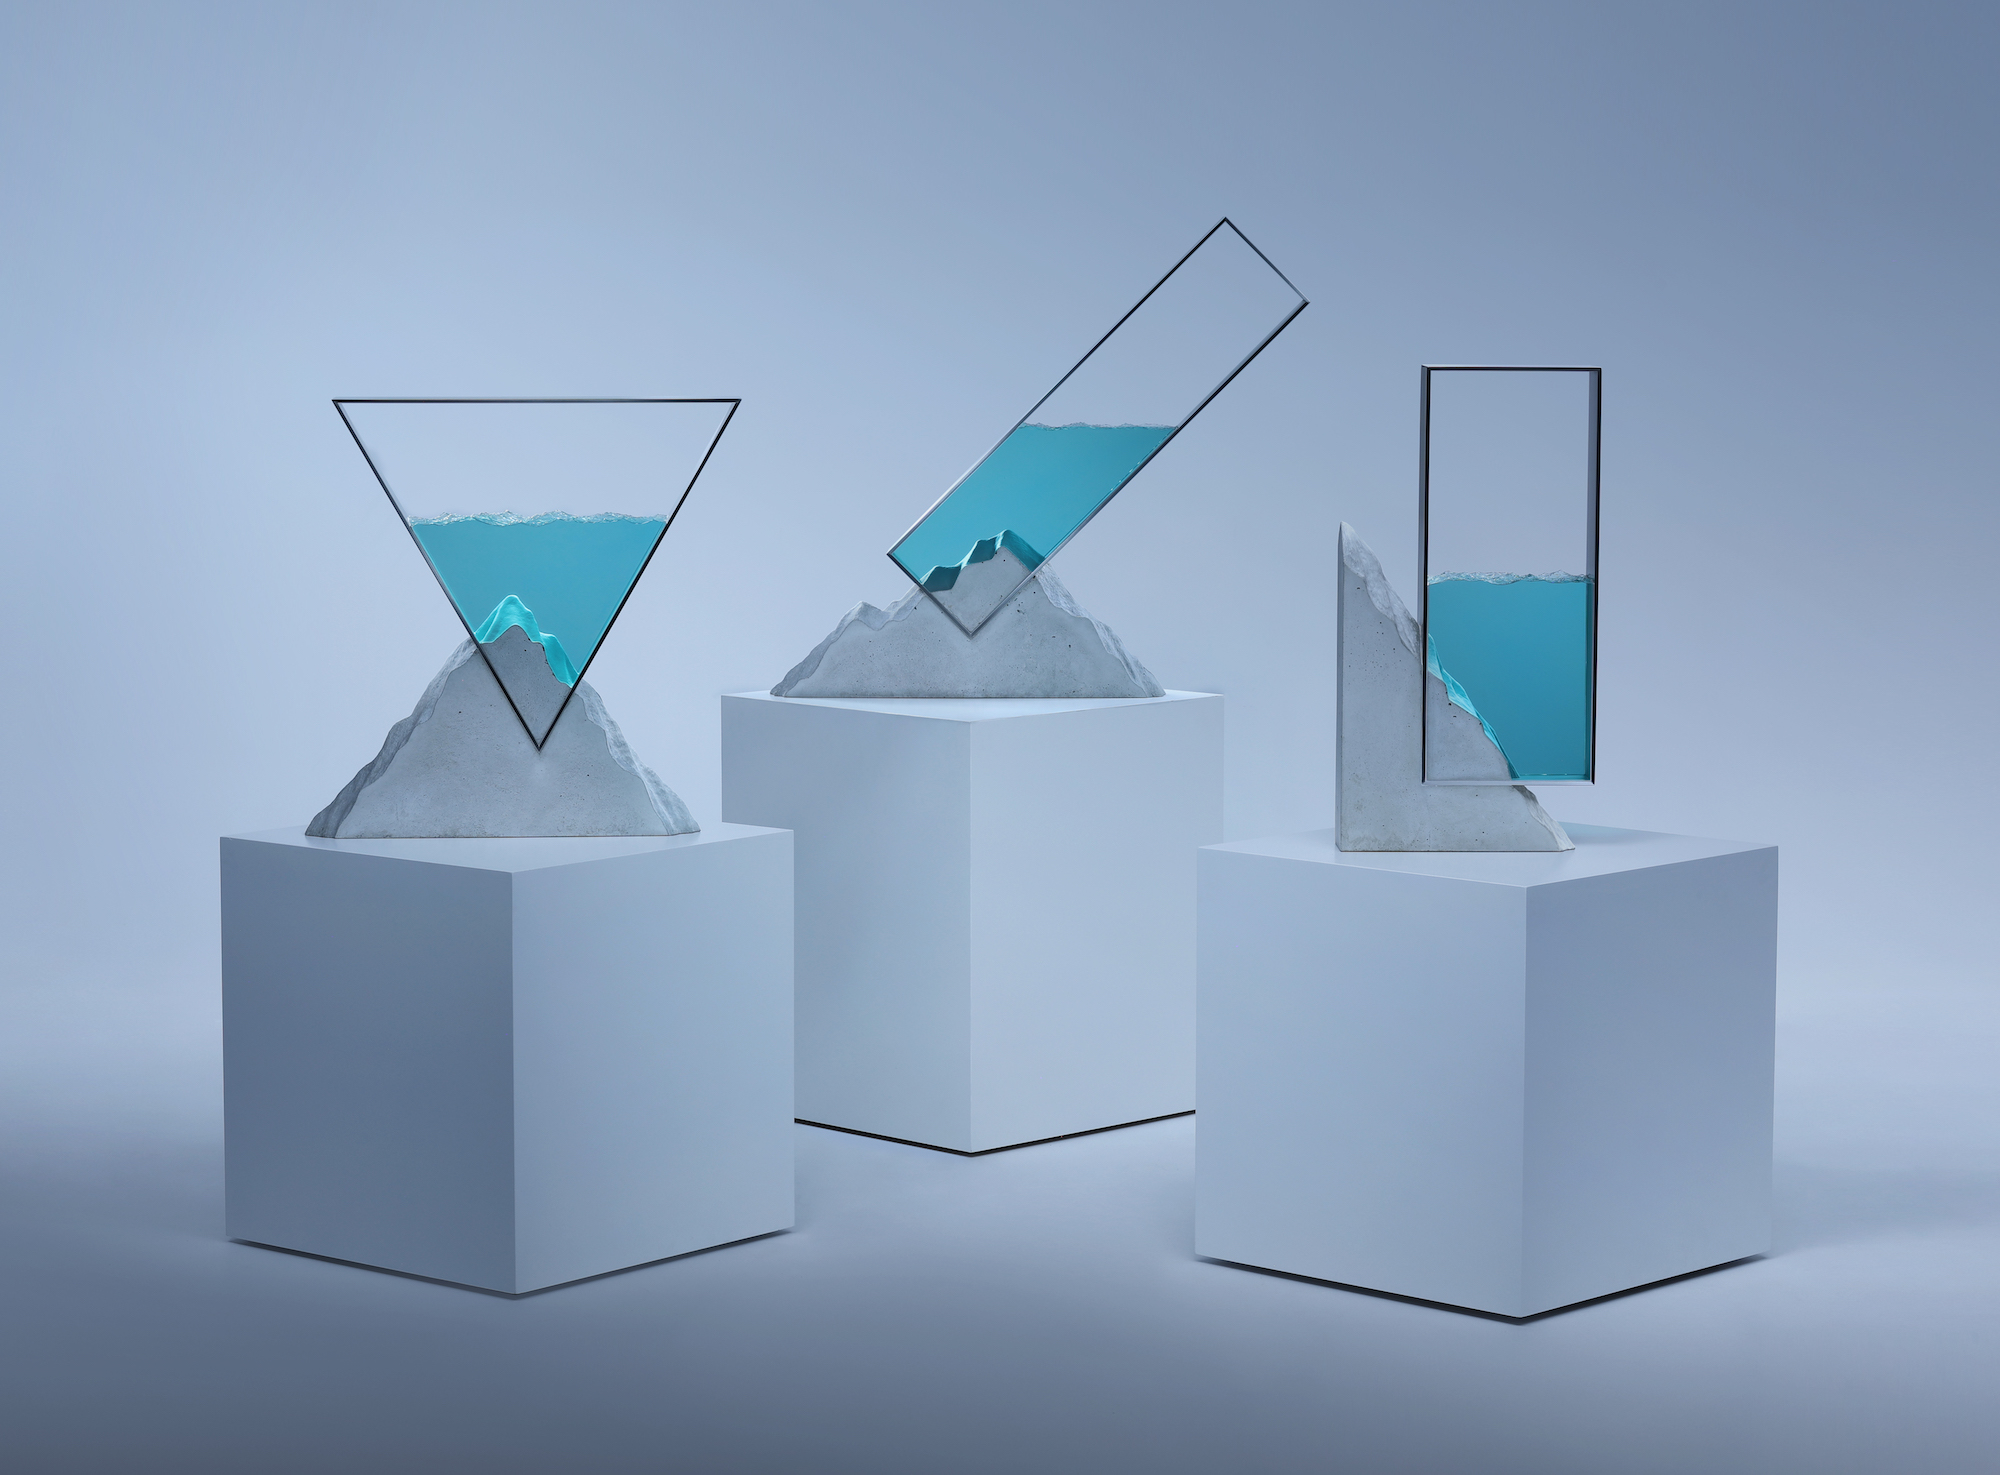 A group of geometric sculptures made from glass, steel, and concrete, displayed on plinths.